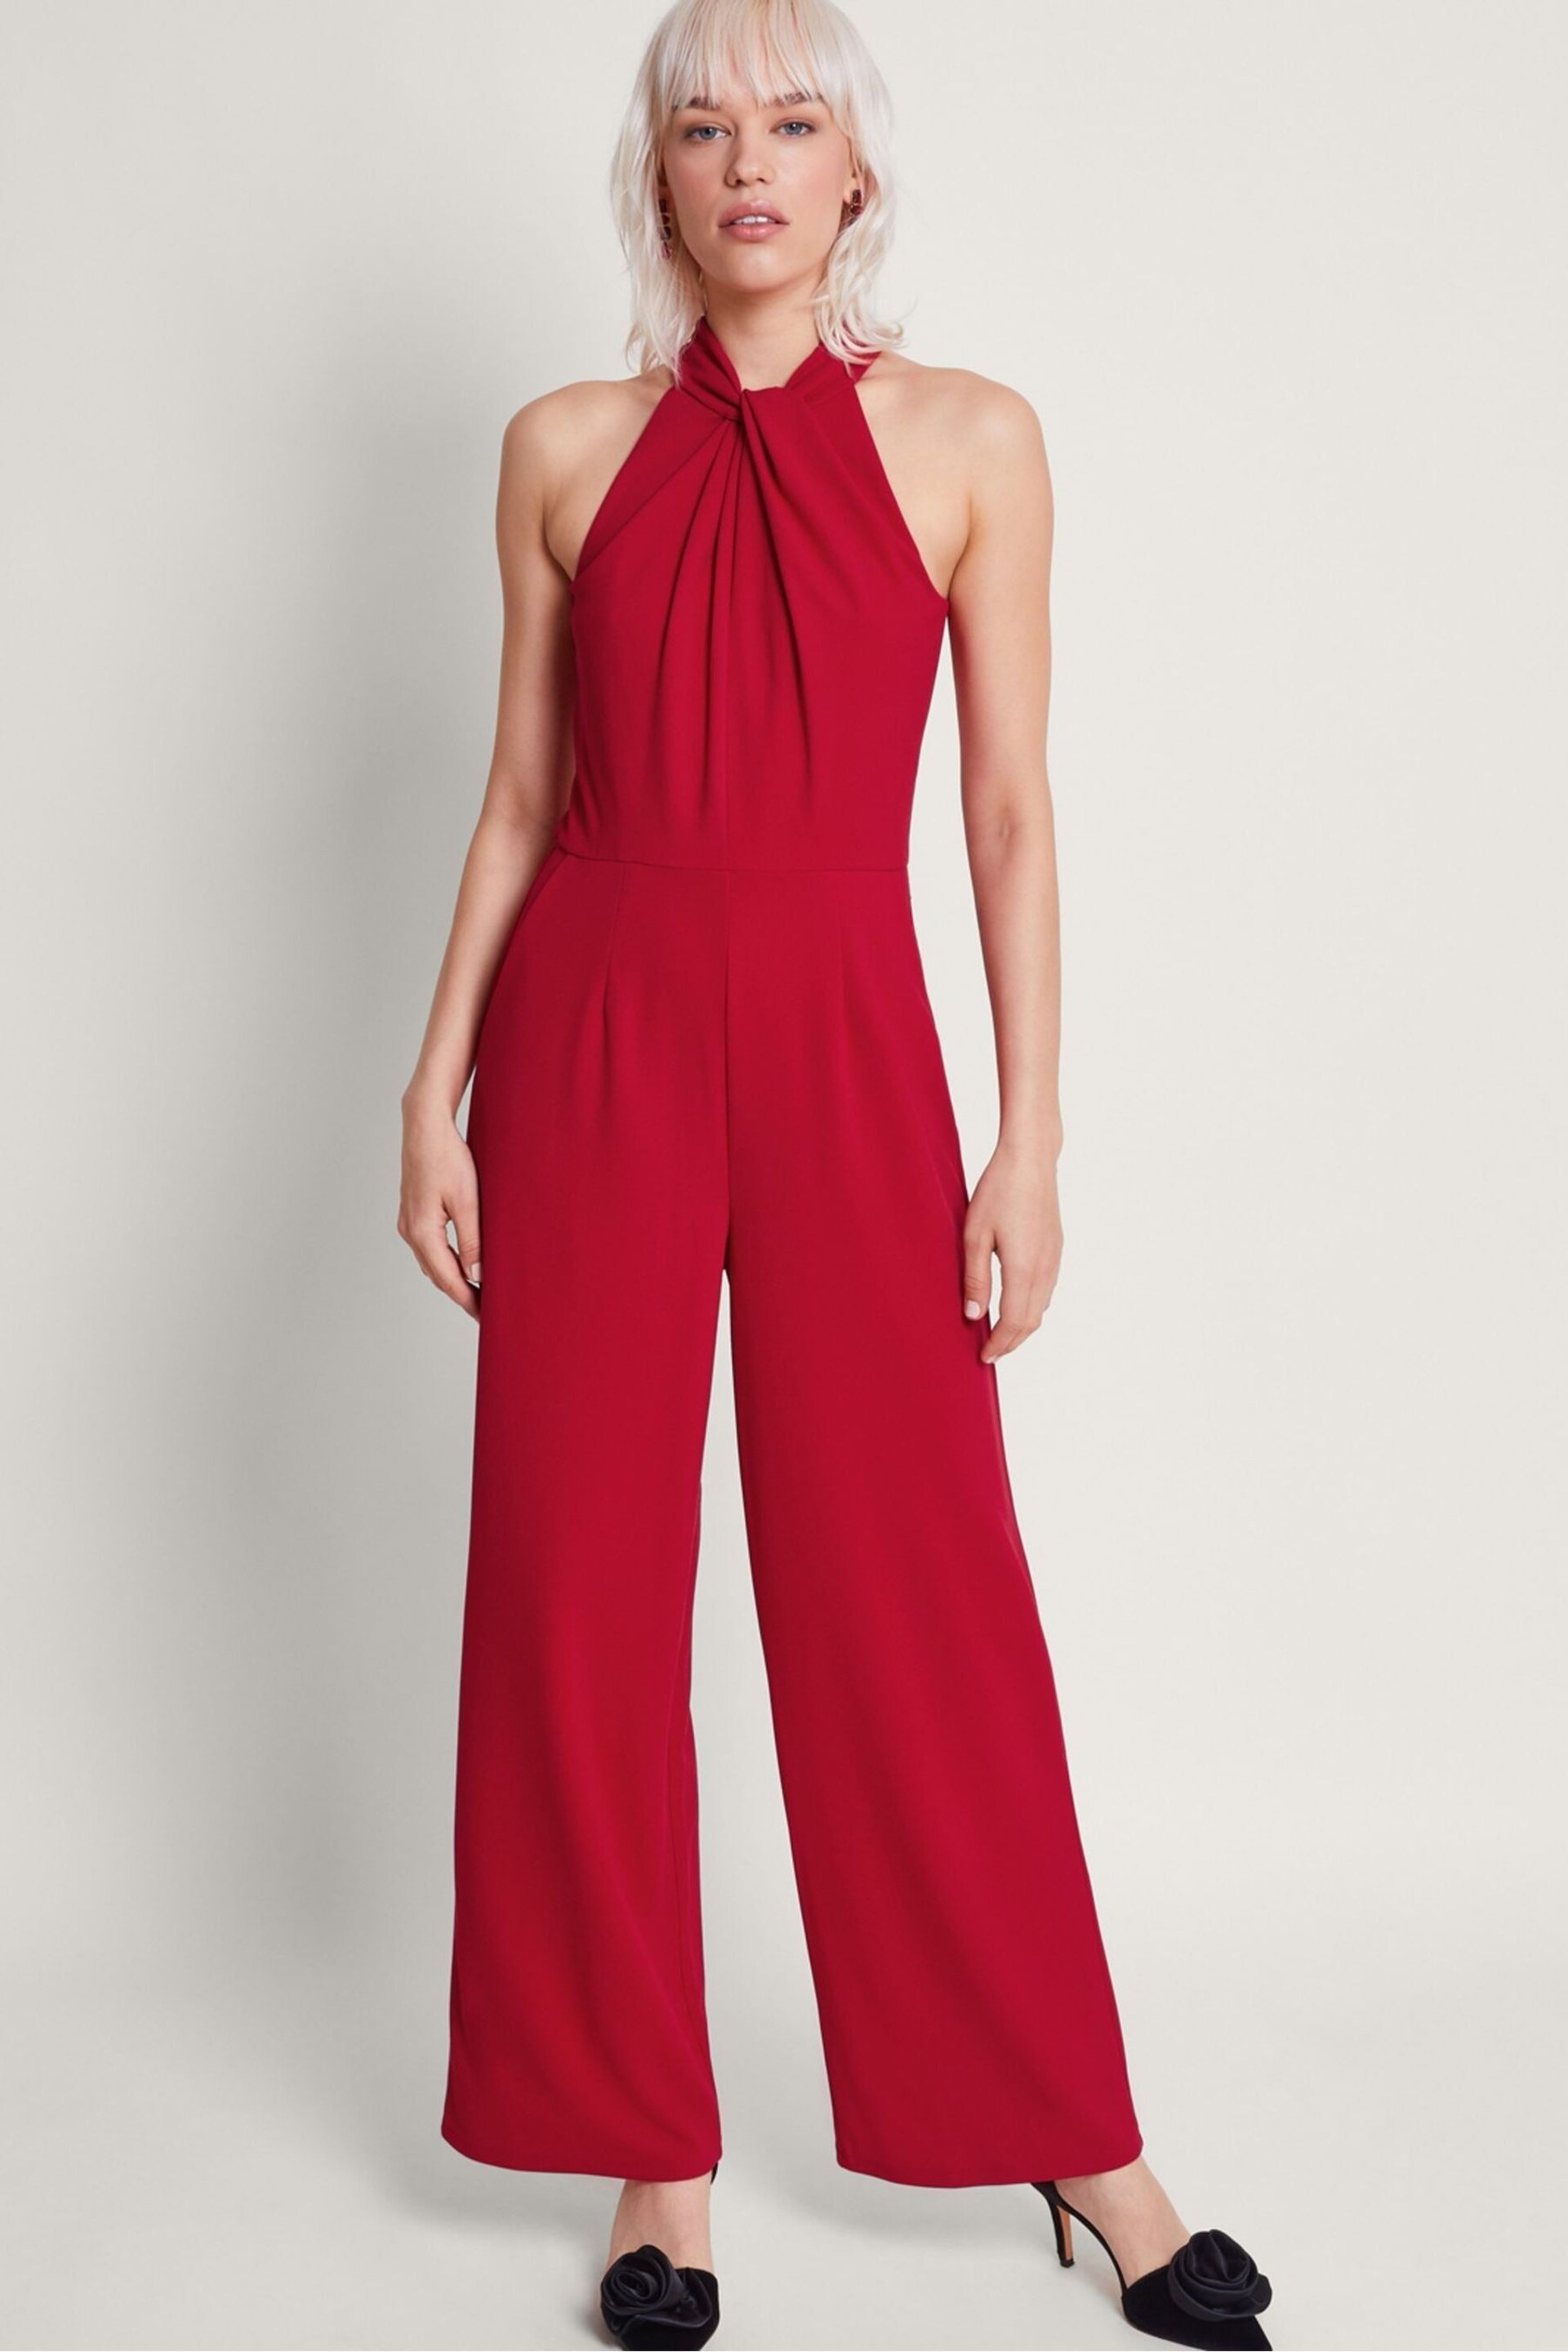 Monsoon Red Cam Cross-Over Jumpsuit - Image 1 of 5